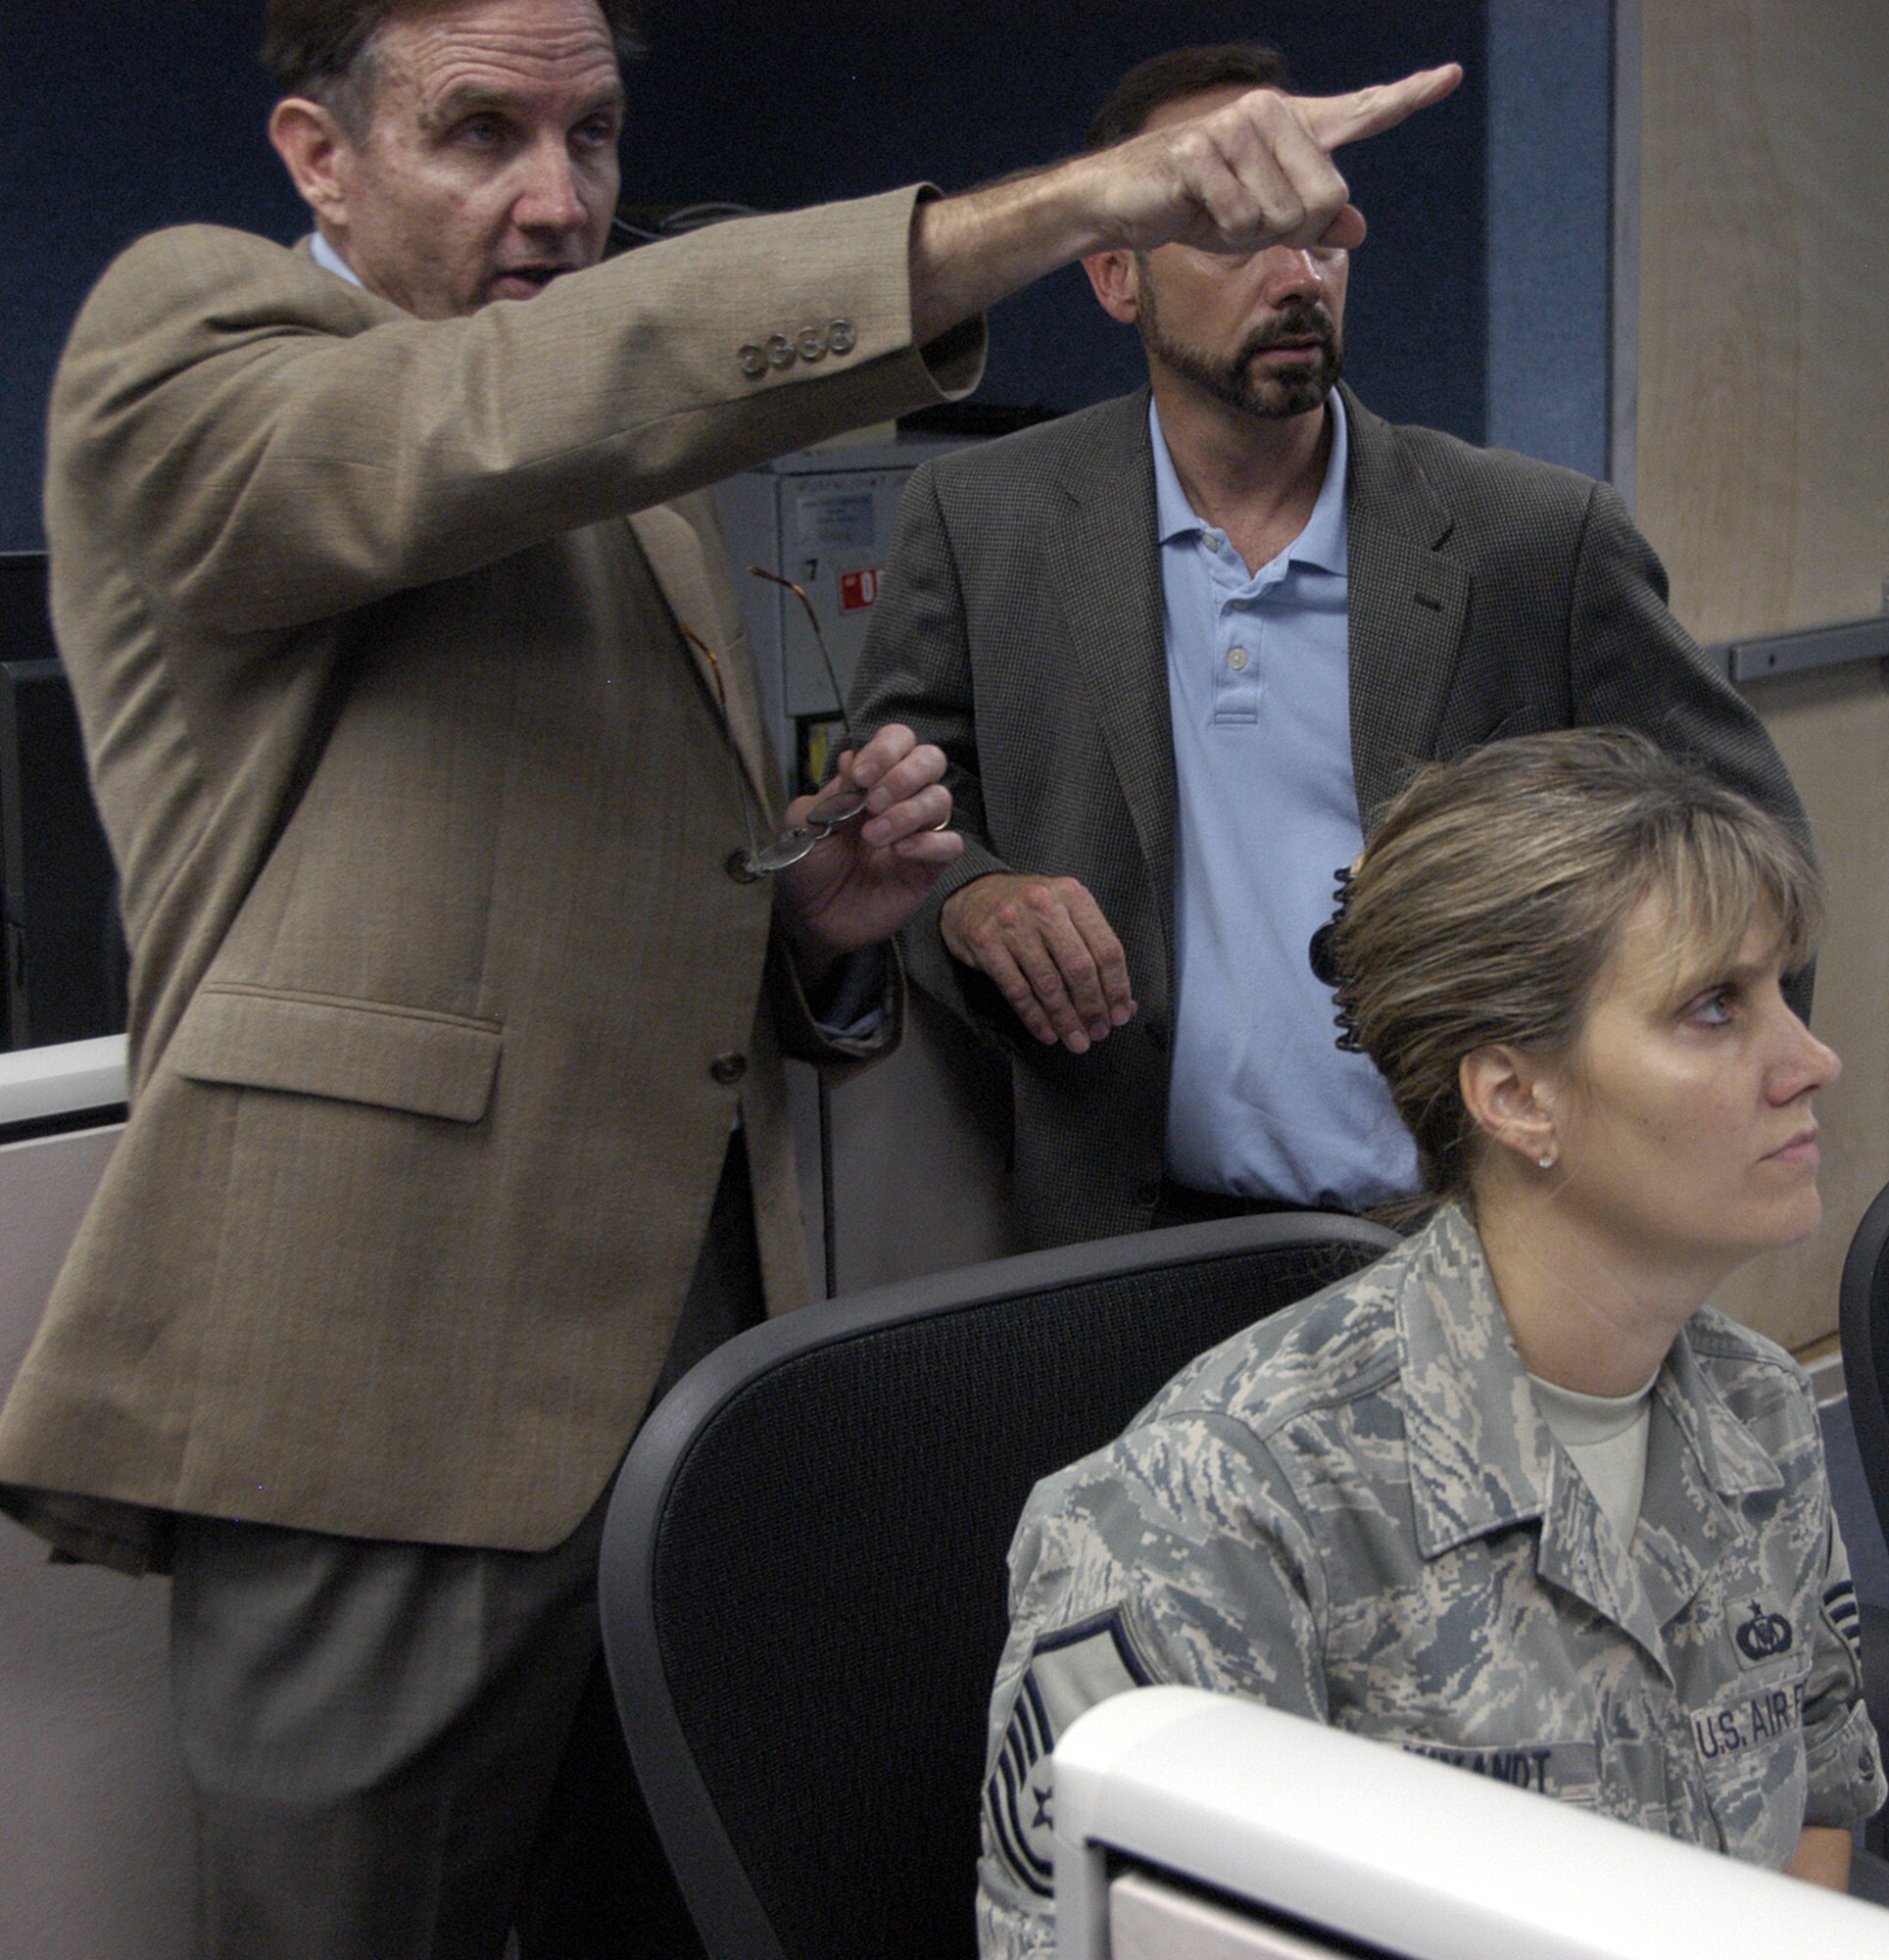 Mr. Larry Christie (forward) and Mr. Steve Boe of AFNORTH DMO team instruct Master Sgt. Angie Wyandt during a VIRTUAl FLAG scenario at Tyndall AFB.  The DMO team is competing fot the 2008 Chief of Staff Team Excellence Award.                                